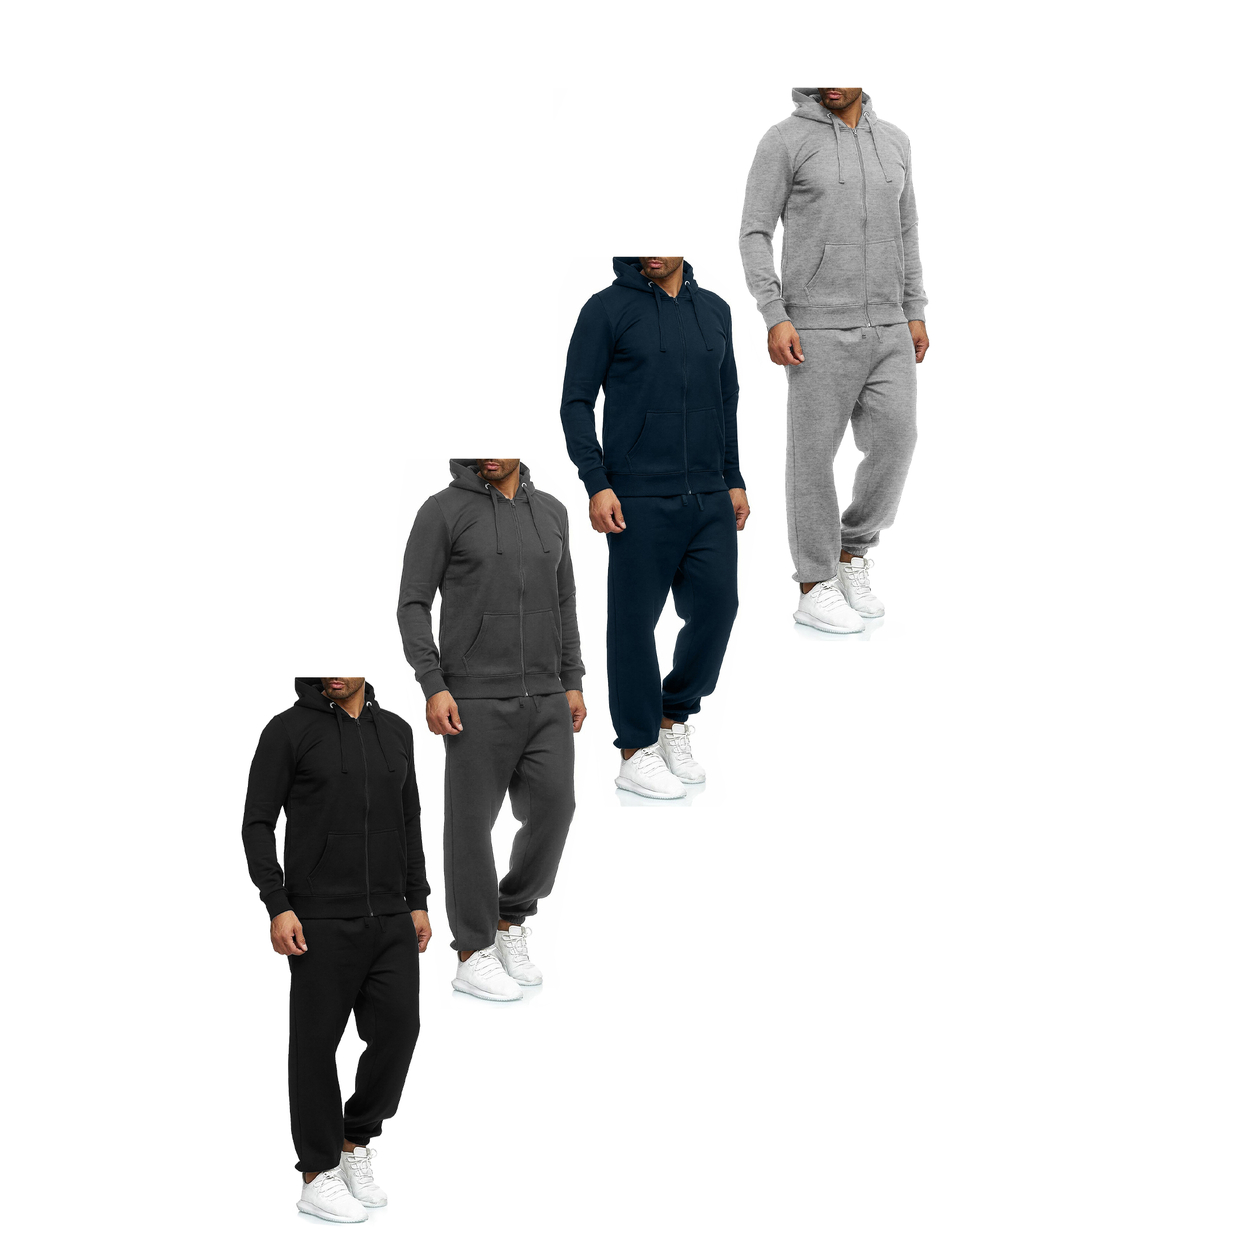 2-Pack: Men's Casual Big & Tall Athletic Active Winter Warm Fleece Lined Full Zip Tracksuit Jogger Set - Black, Xx-large